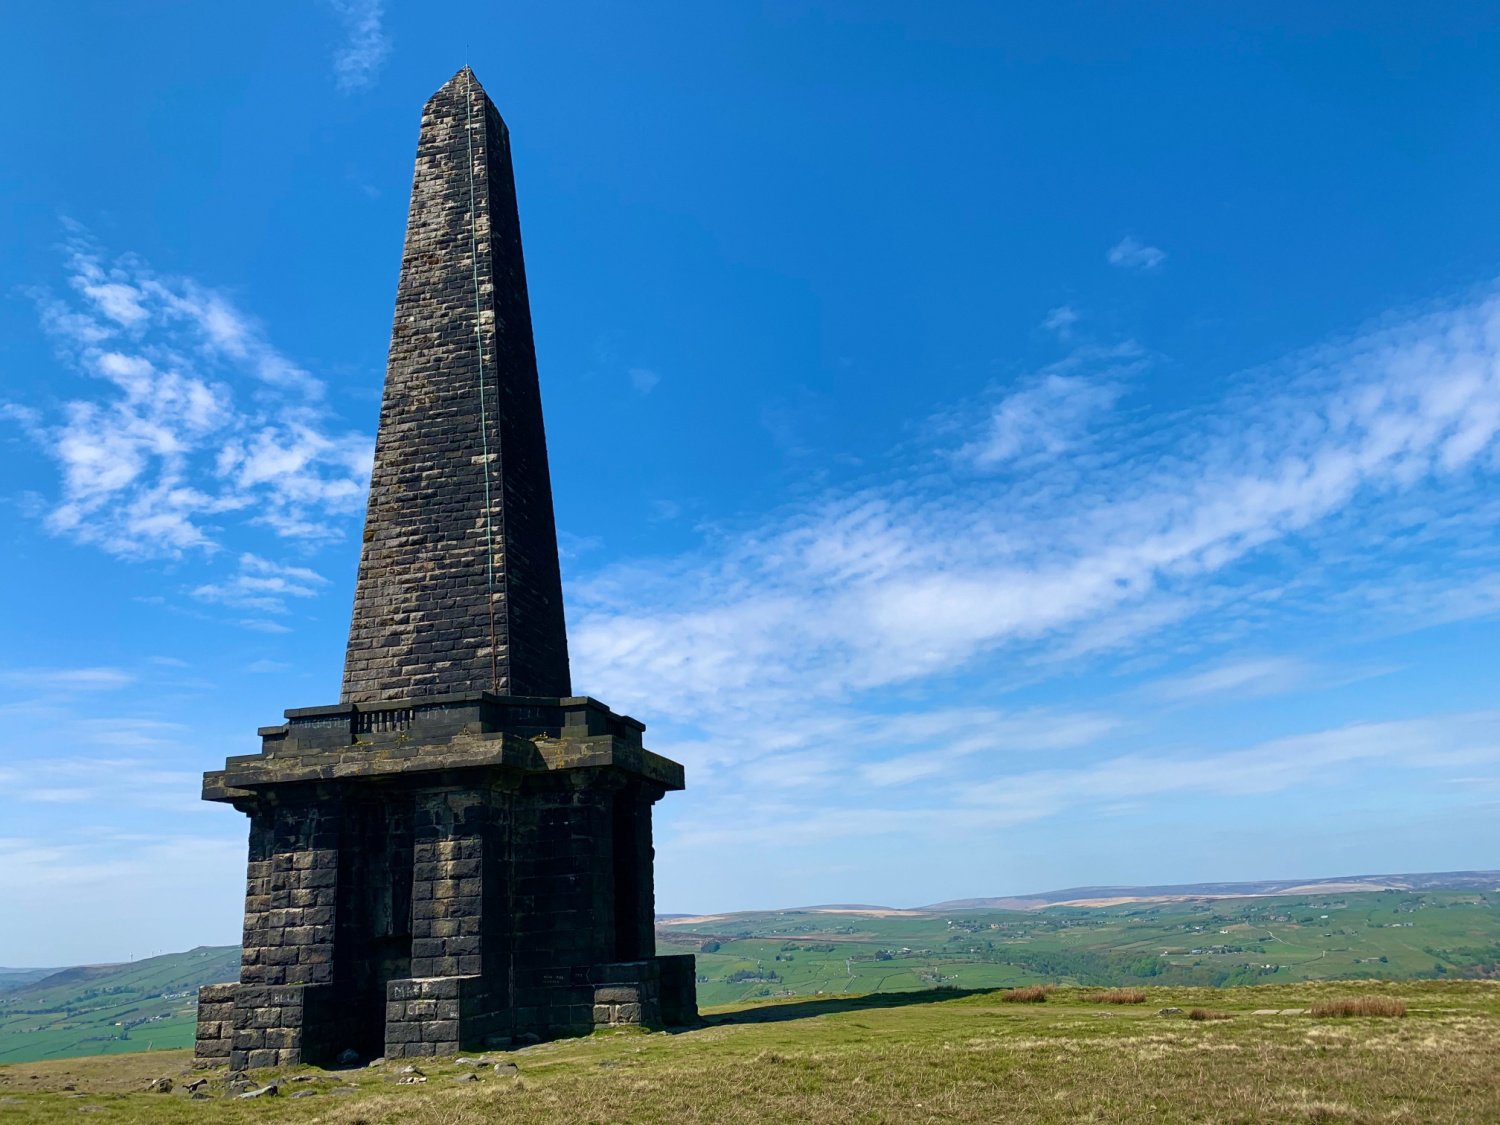 Image name stoodley pike monument todmorden yorkshire the 30 image from the post Walk: Stoodley Pike in Yorkshire.com.